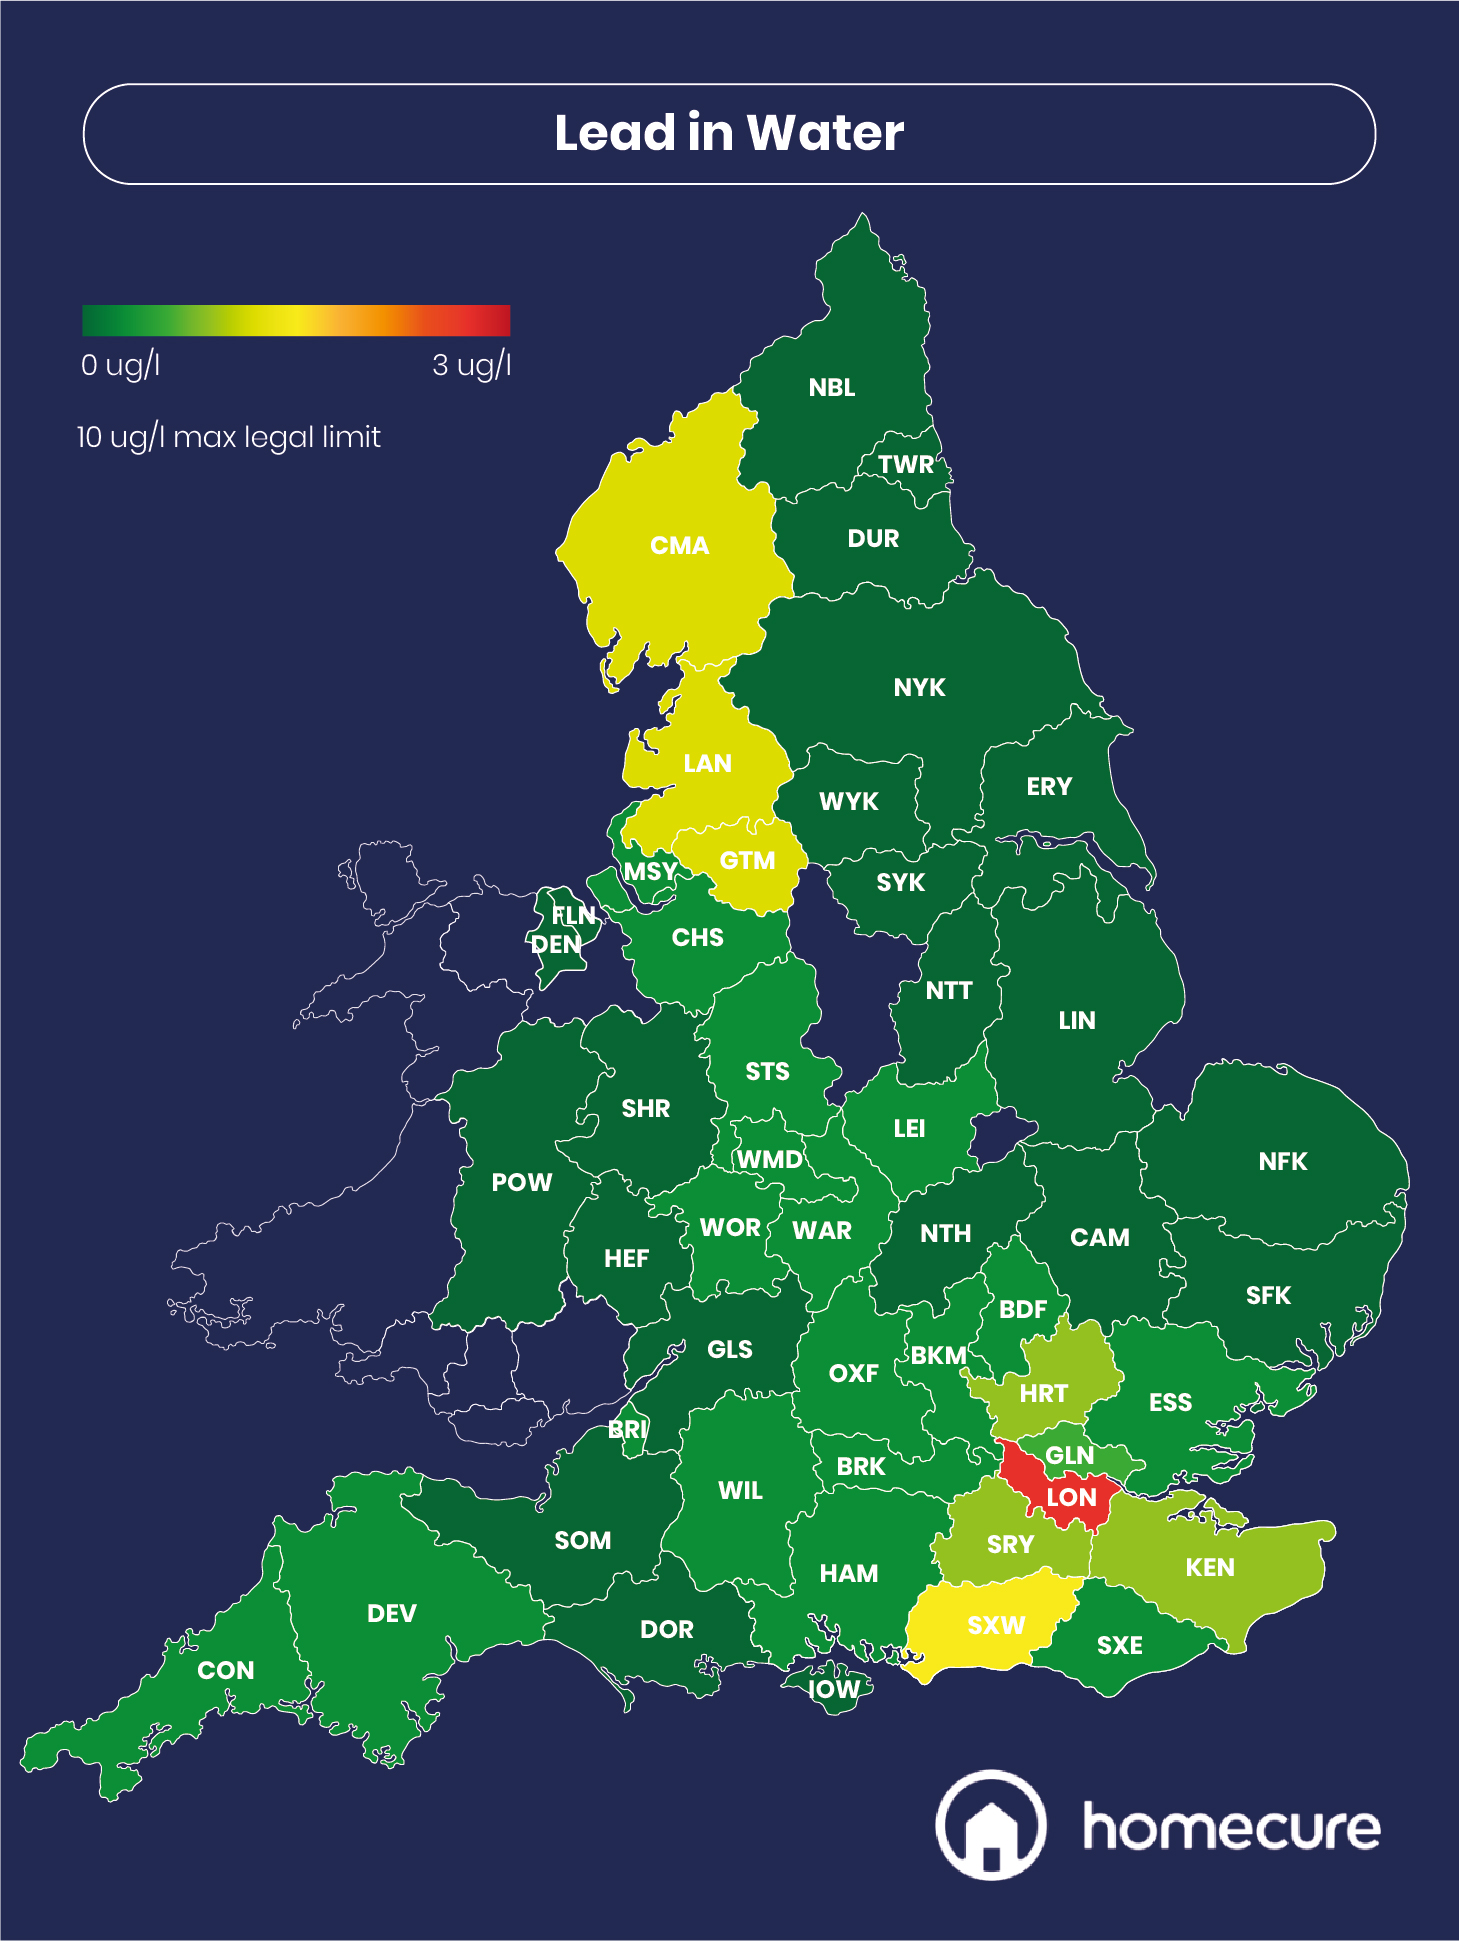 The UK counties with the highest levels of lead in water quality tests?